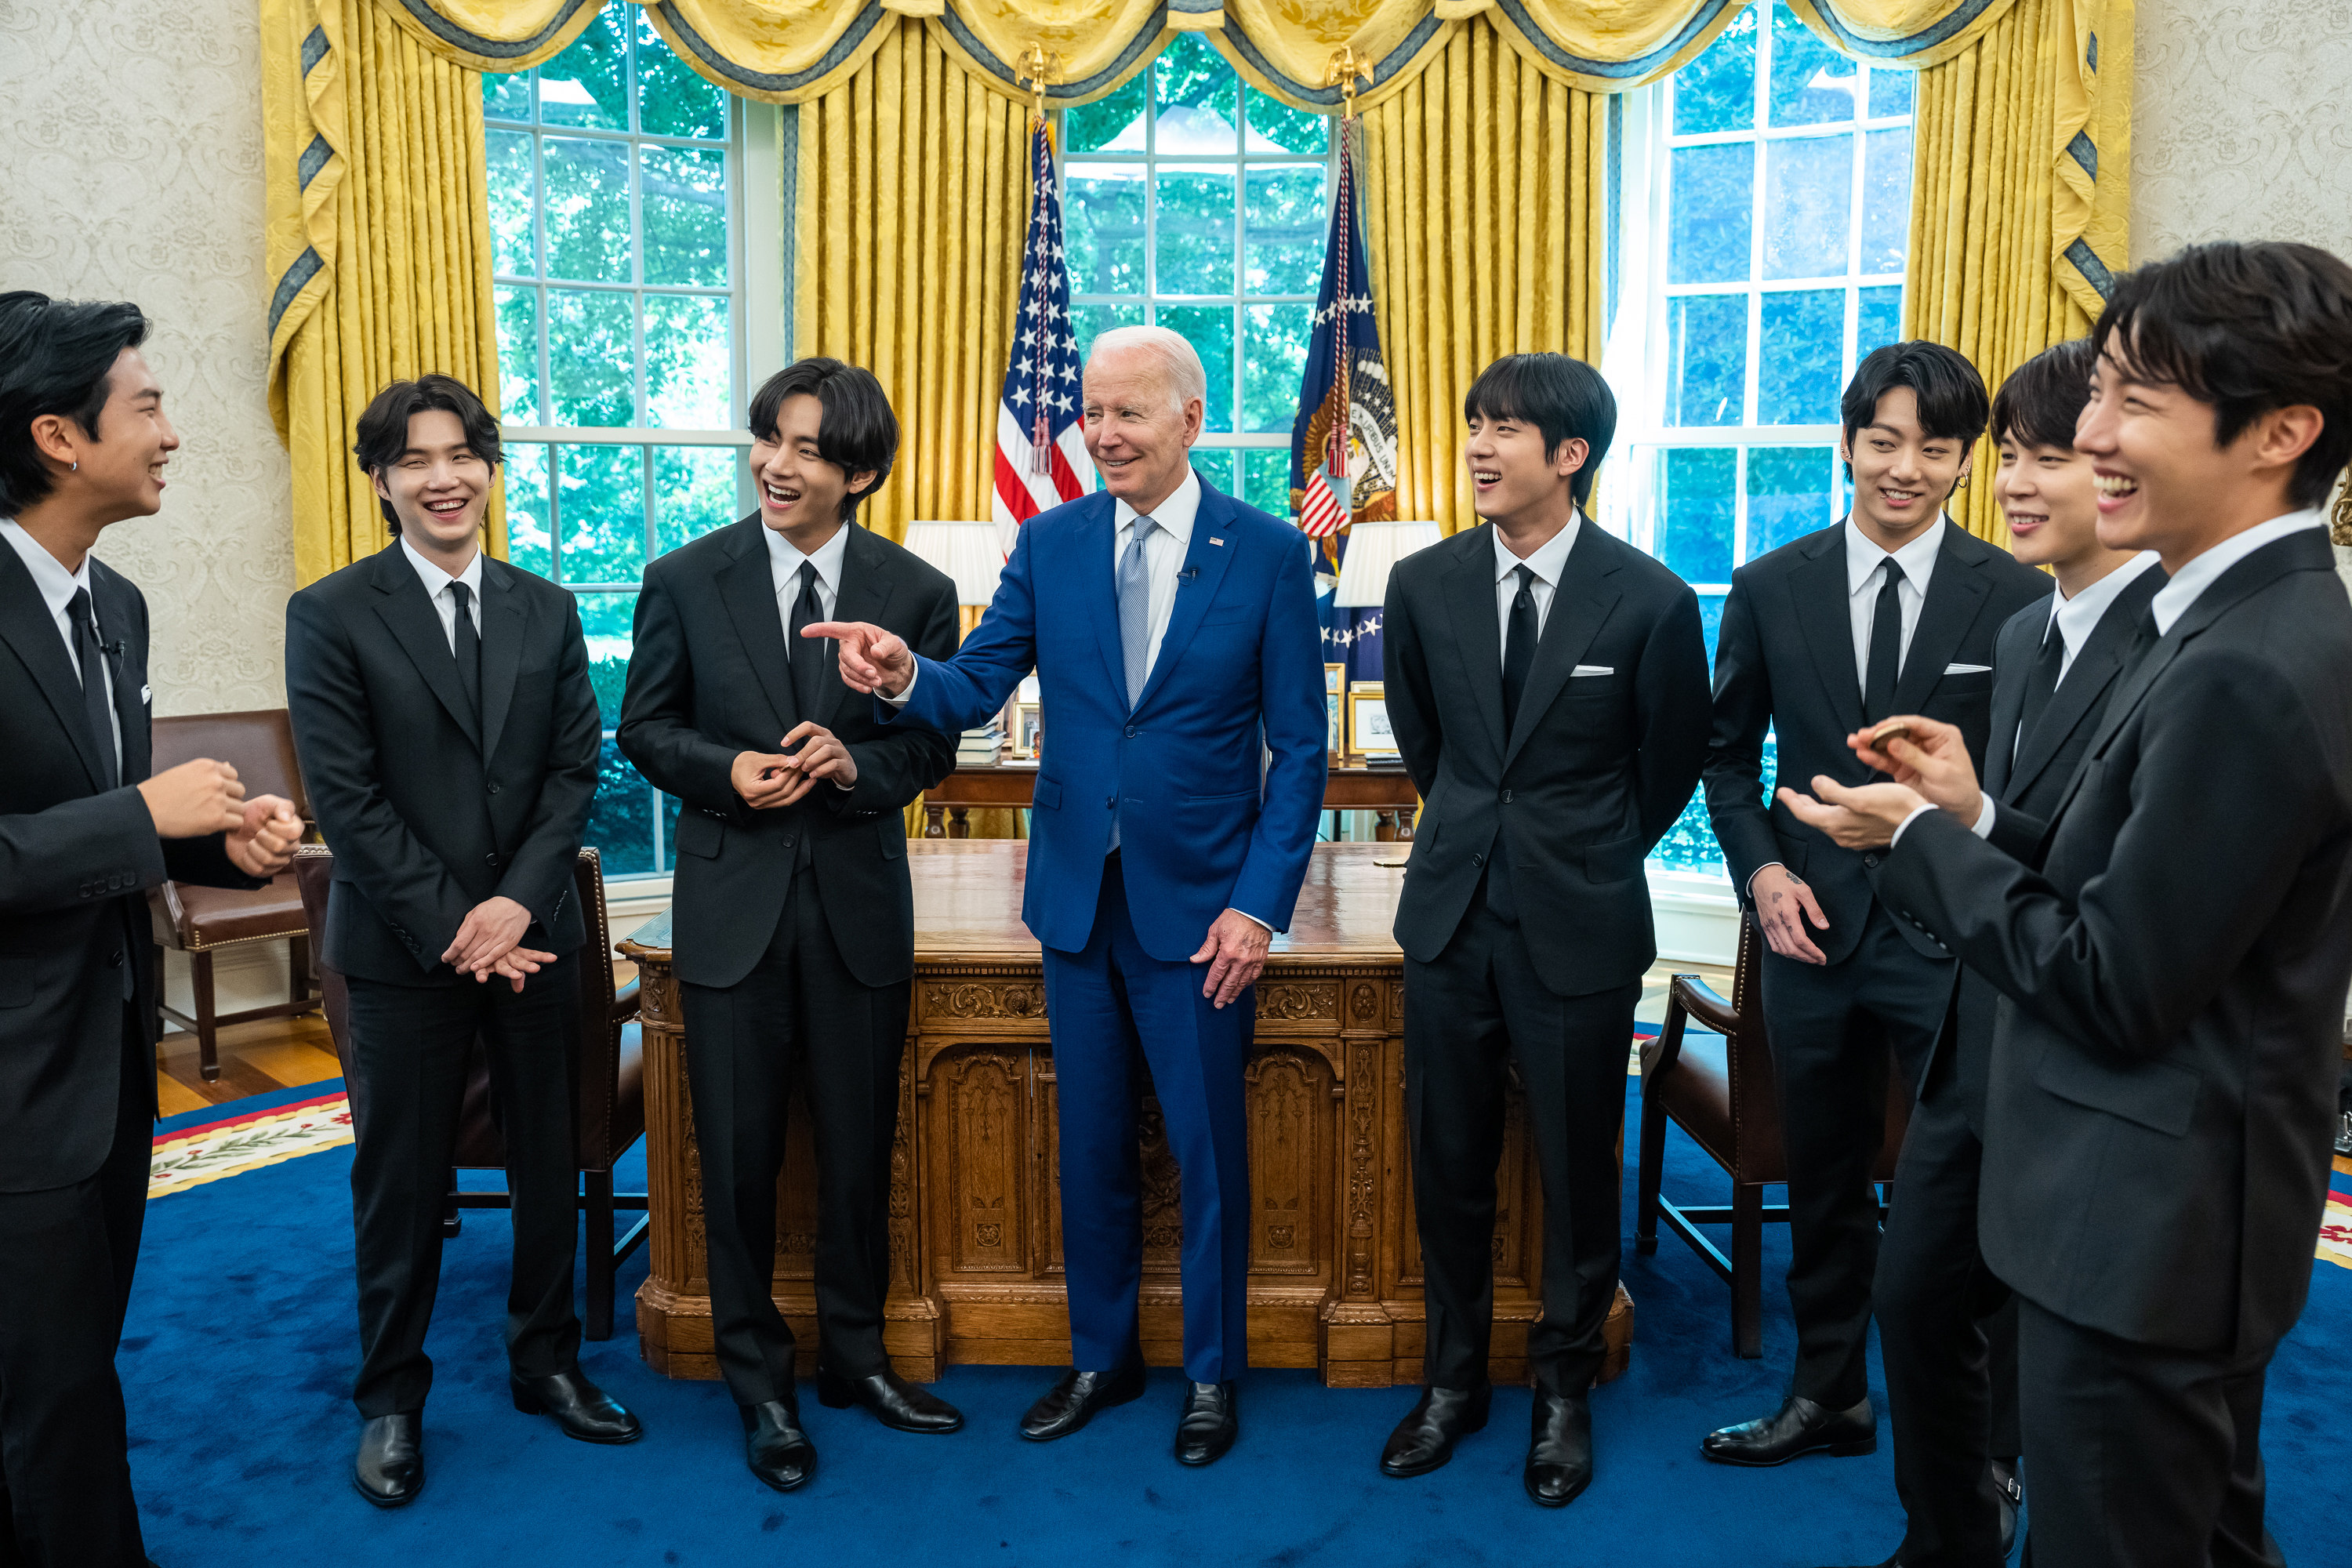 BTS Visit White House to Discuss Asian Inclusion and Representation